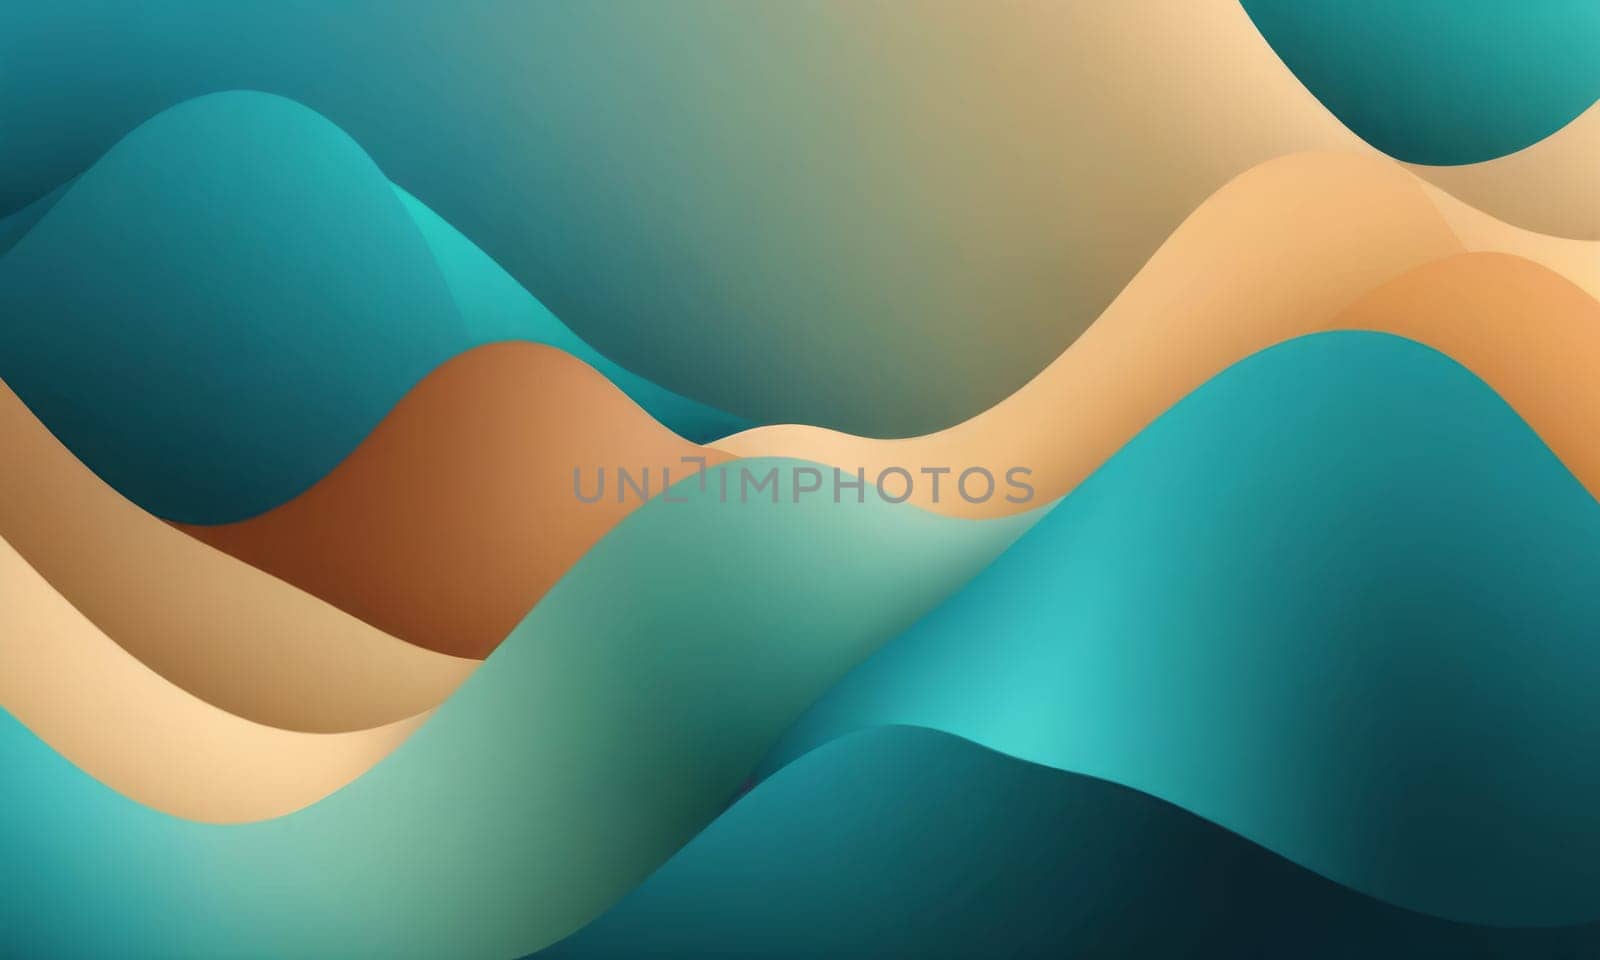 Waved Shapes in Teal Tan by nkotlyar